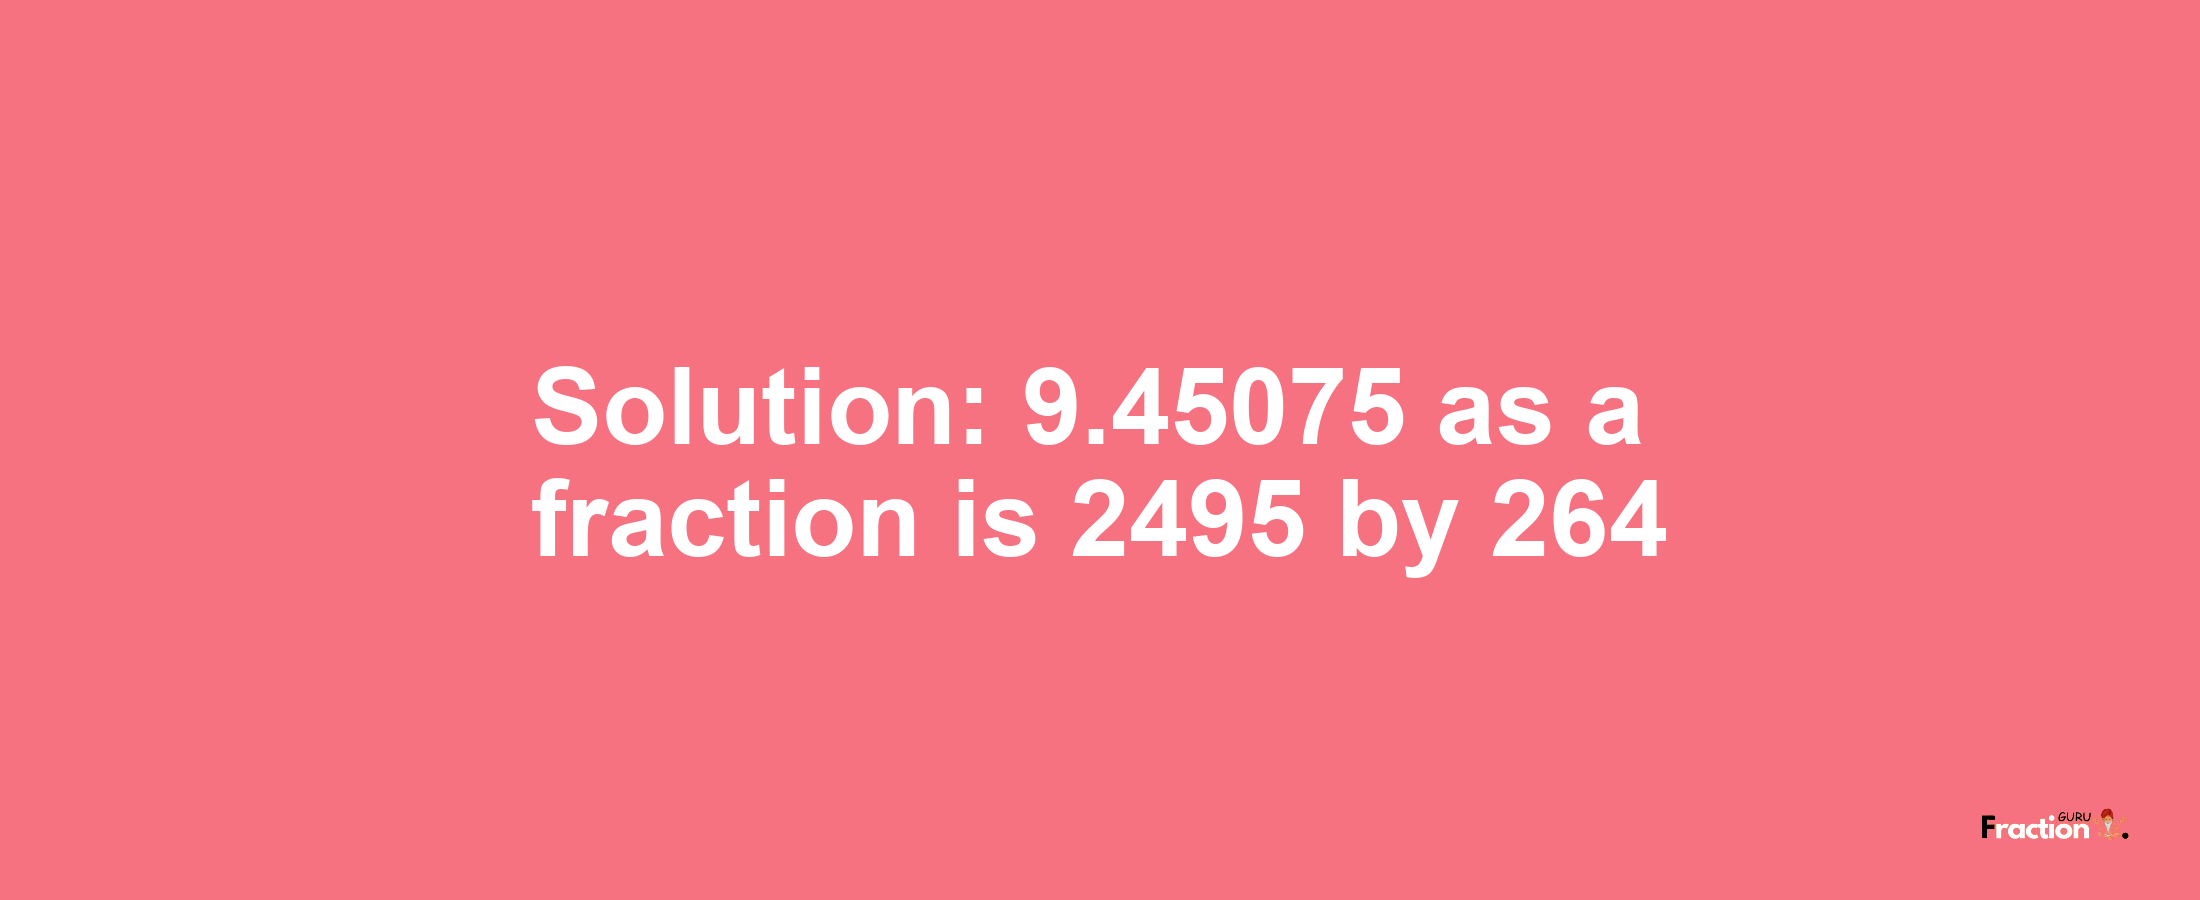 Solution:9.45075 as a fraction is 2495/264